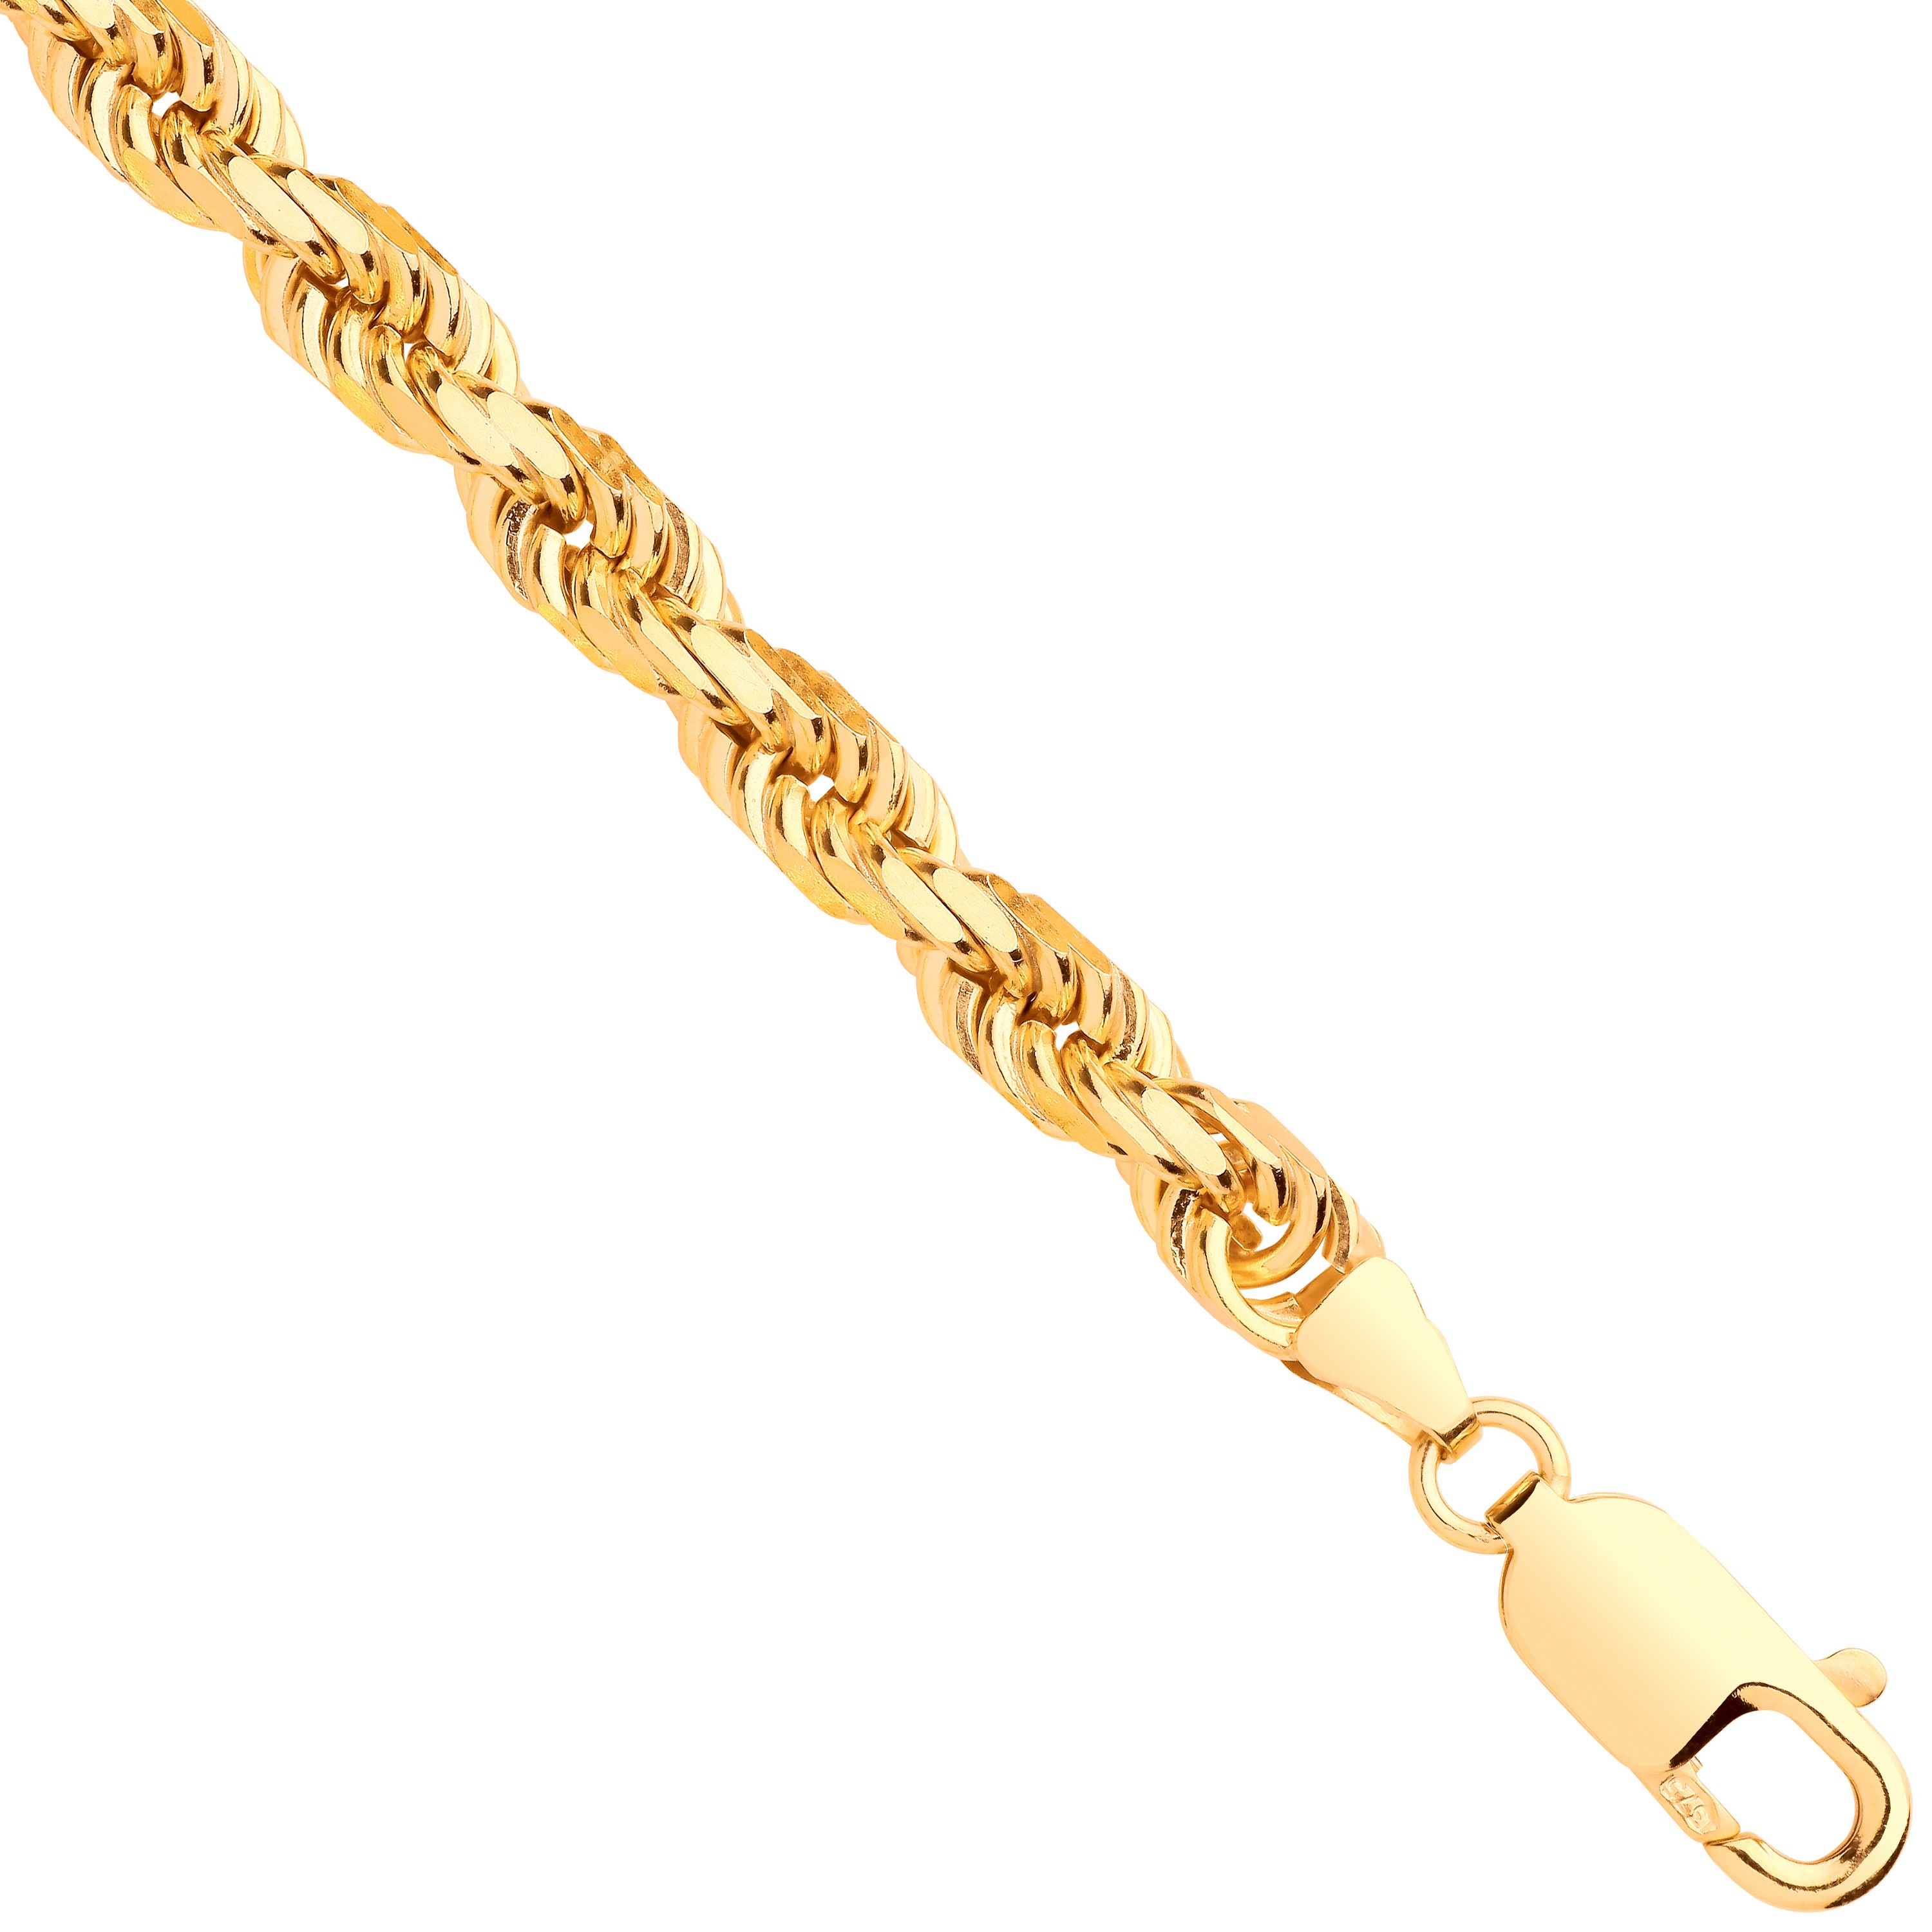 Y/G D/C 5.2mm Solid Rope Chain